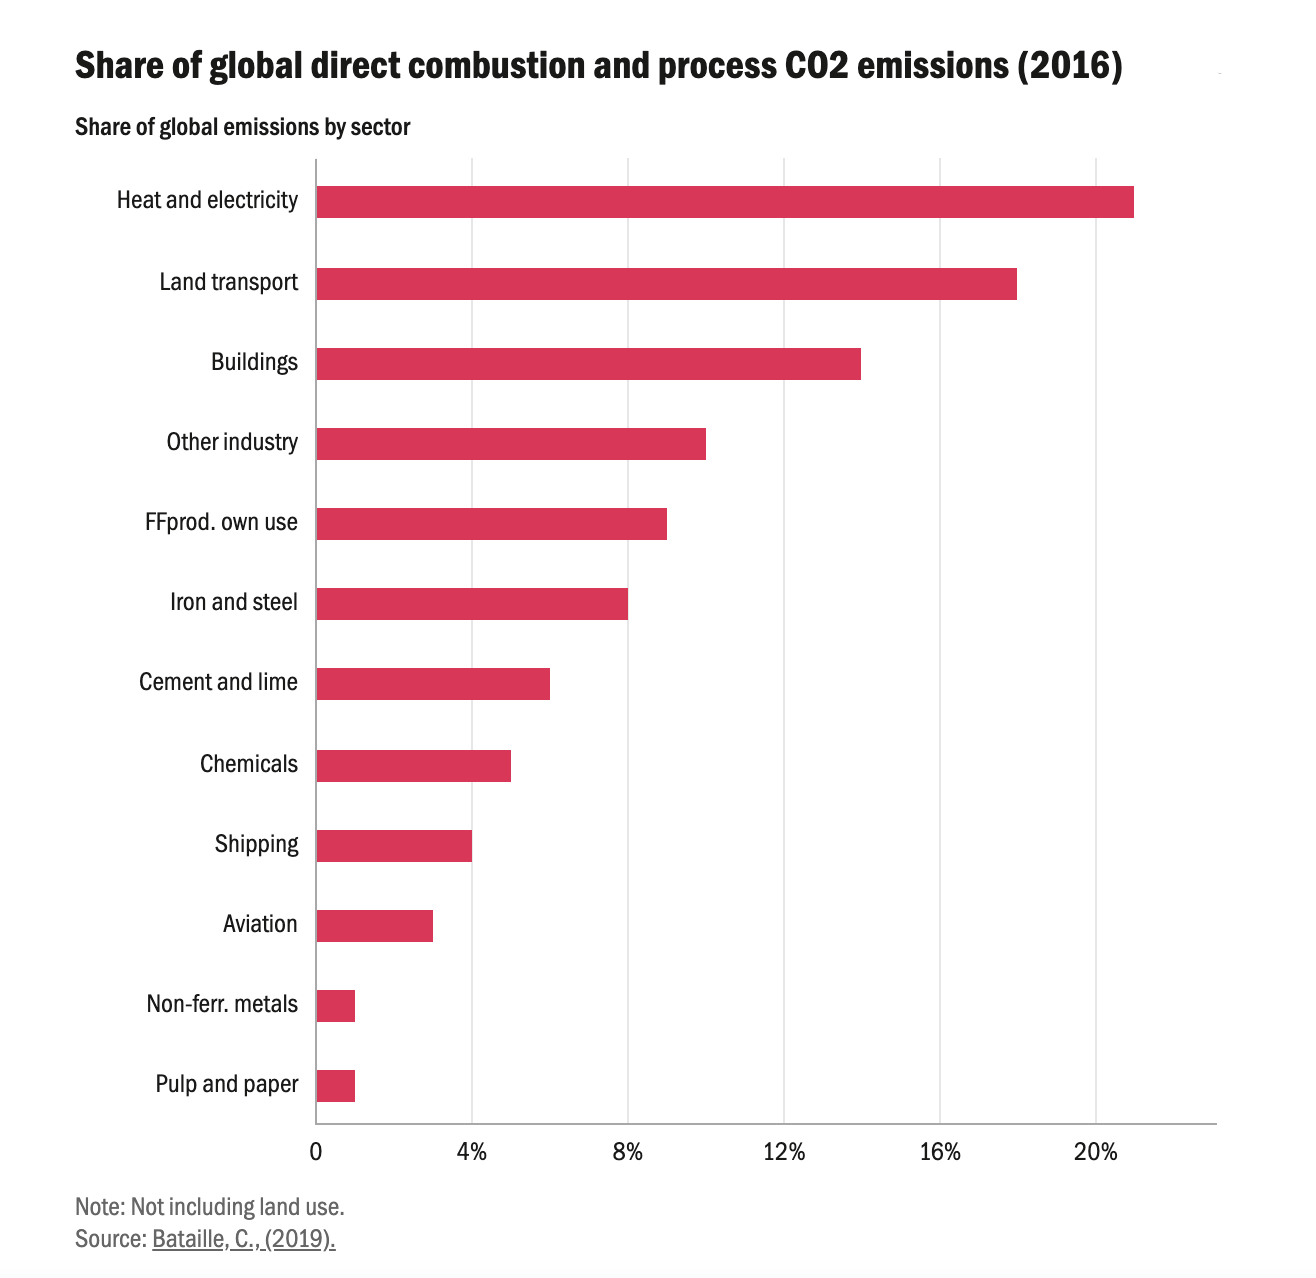 Share of global direct combustion and process C)2 emissions 2016